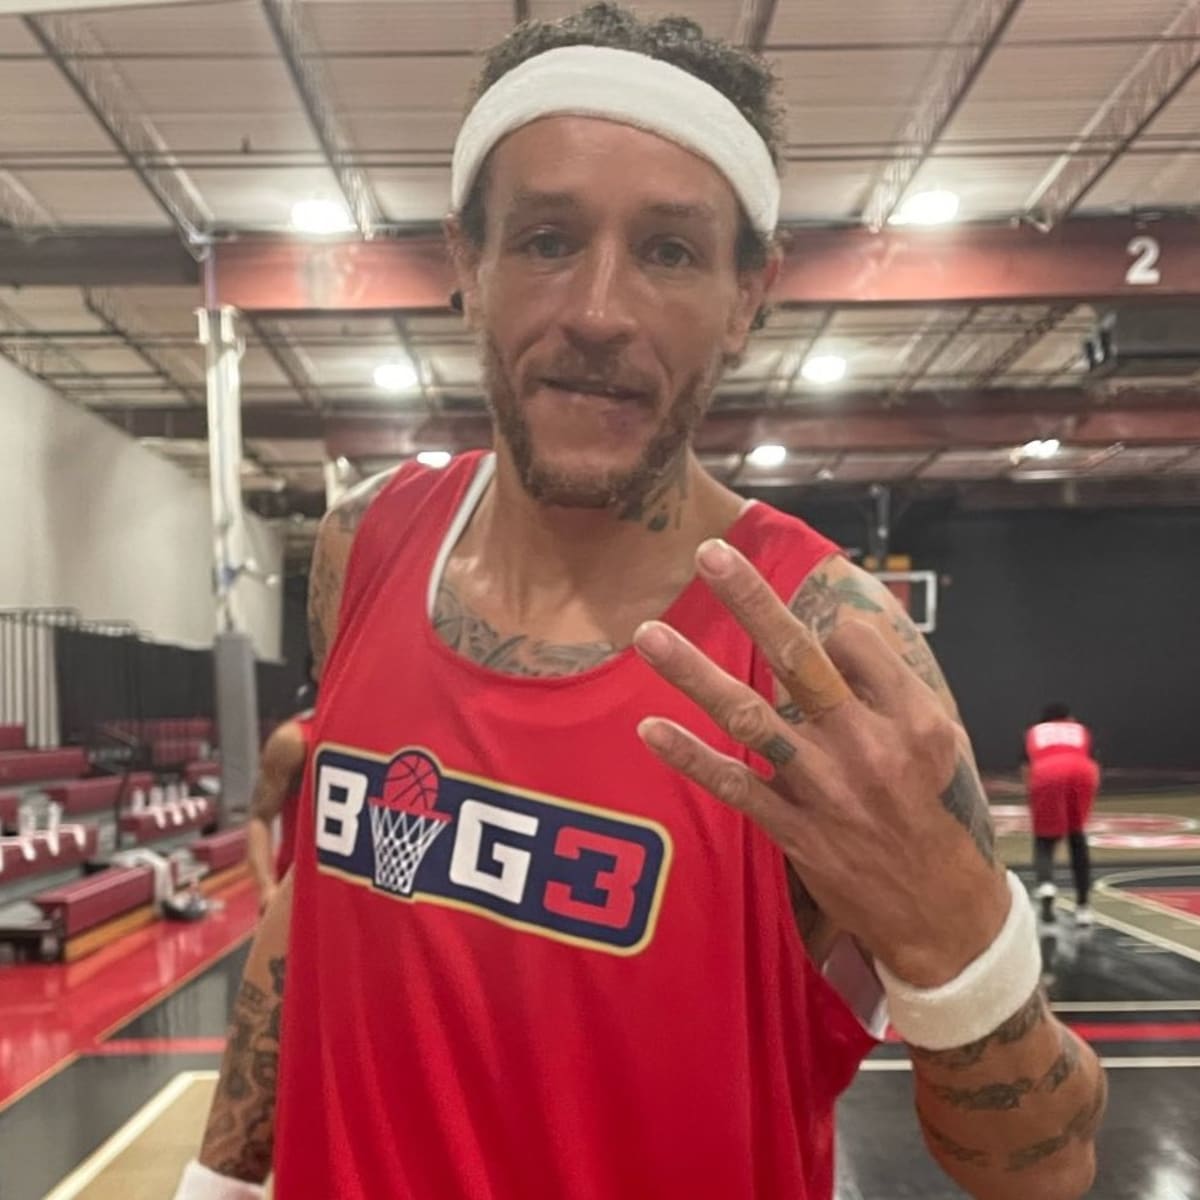 Where is Delonte West now and what happened to him?